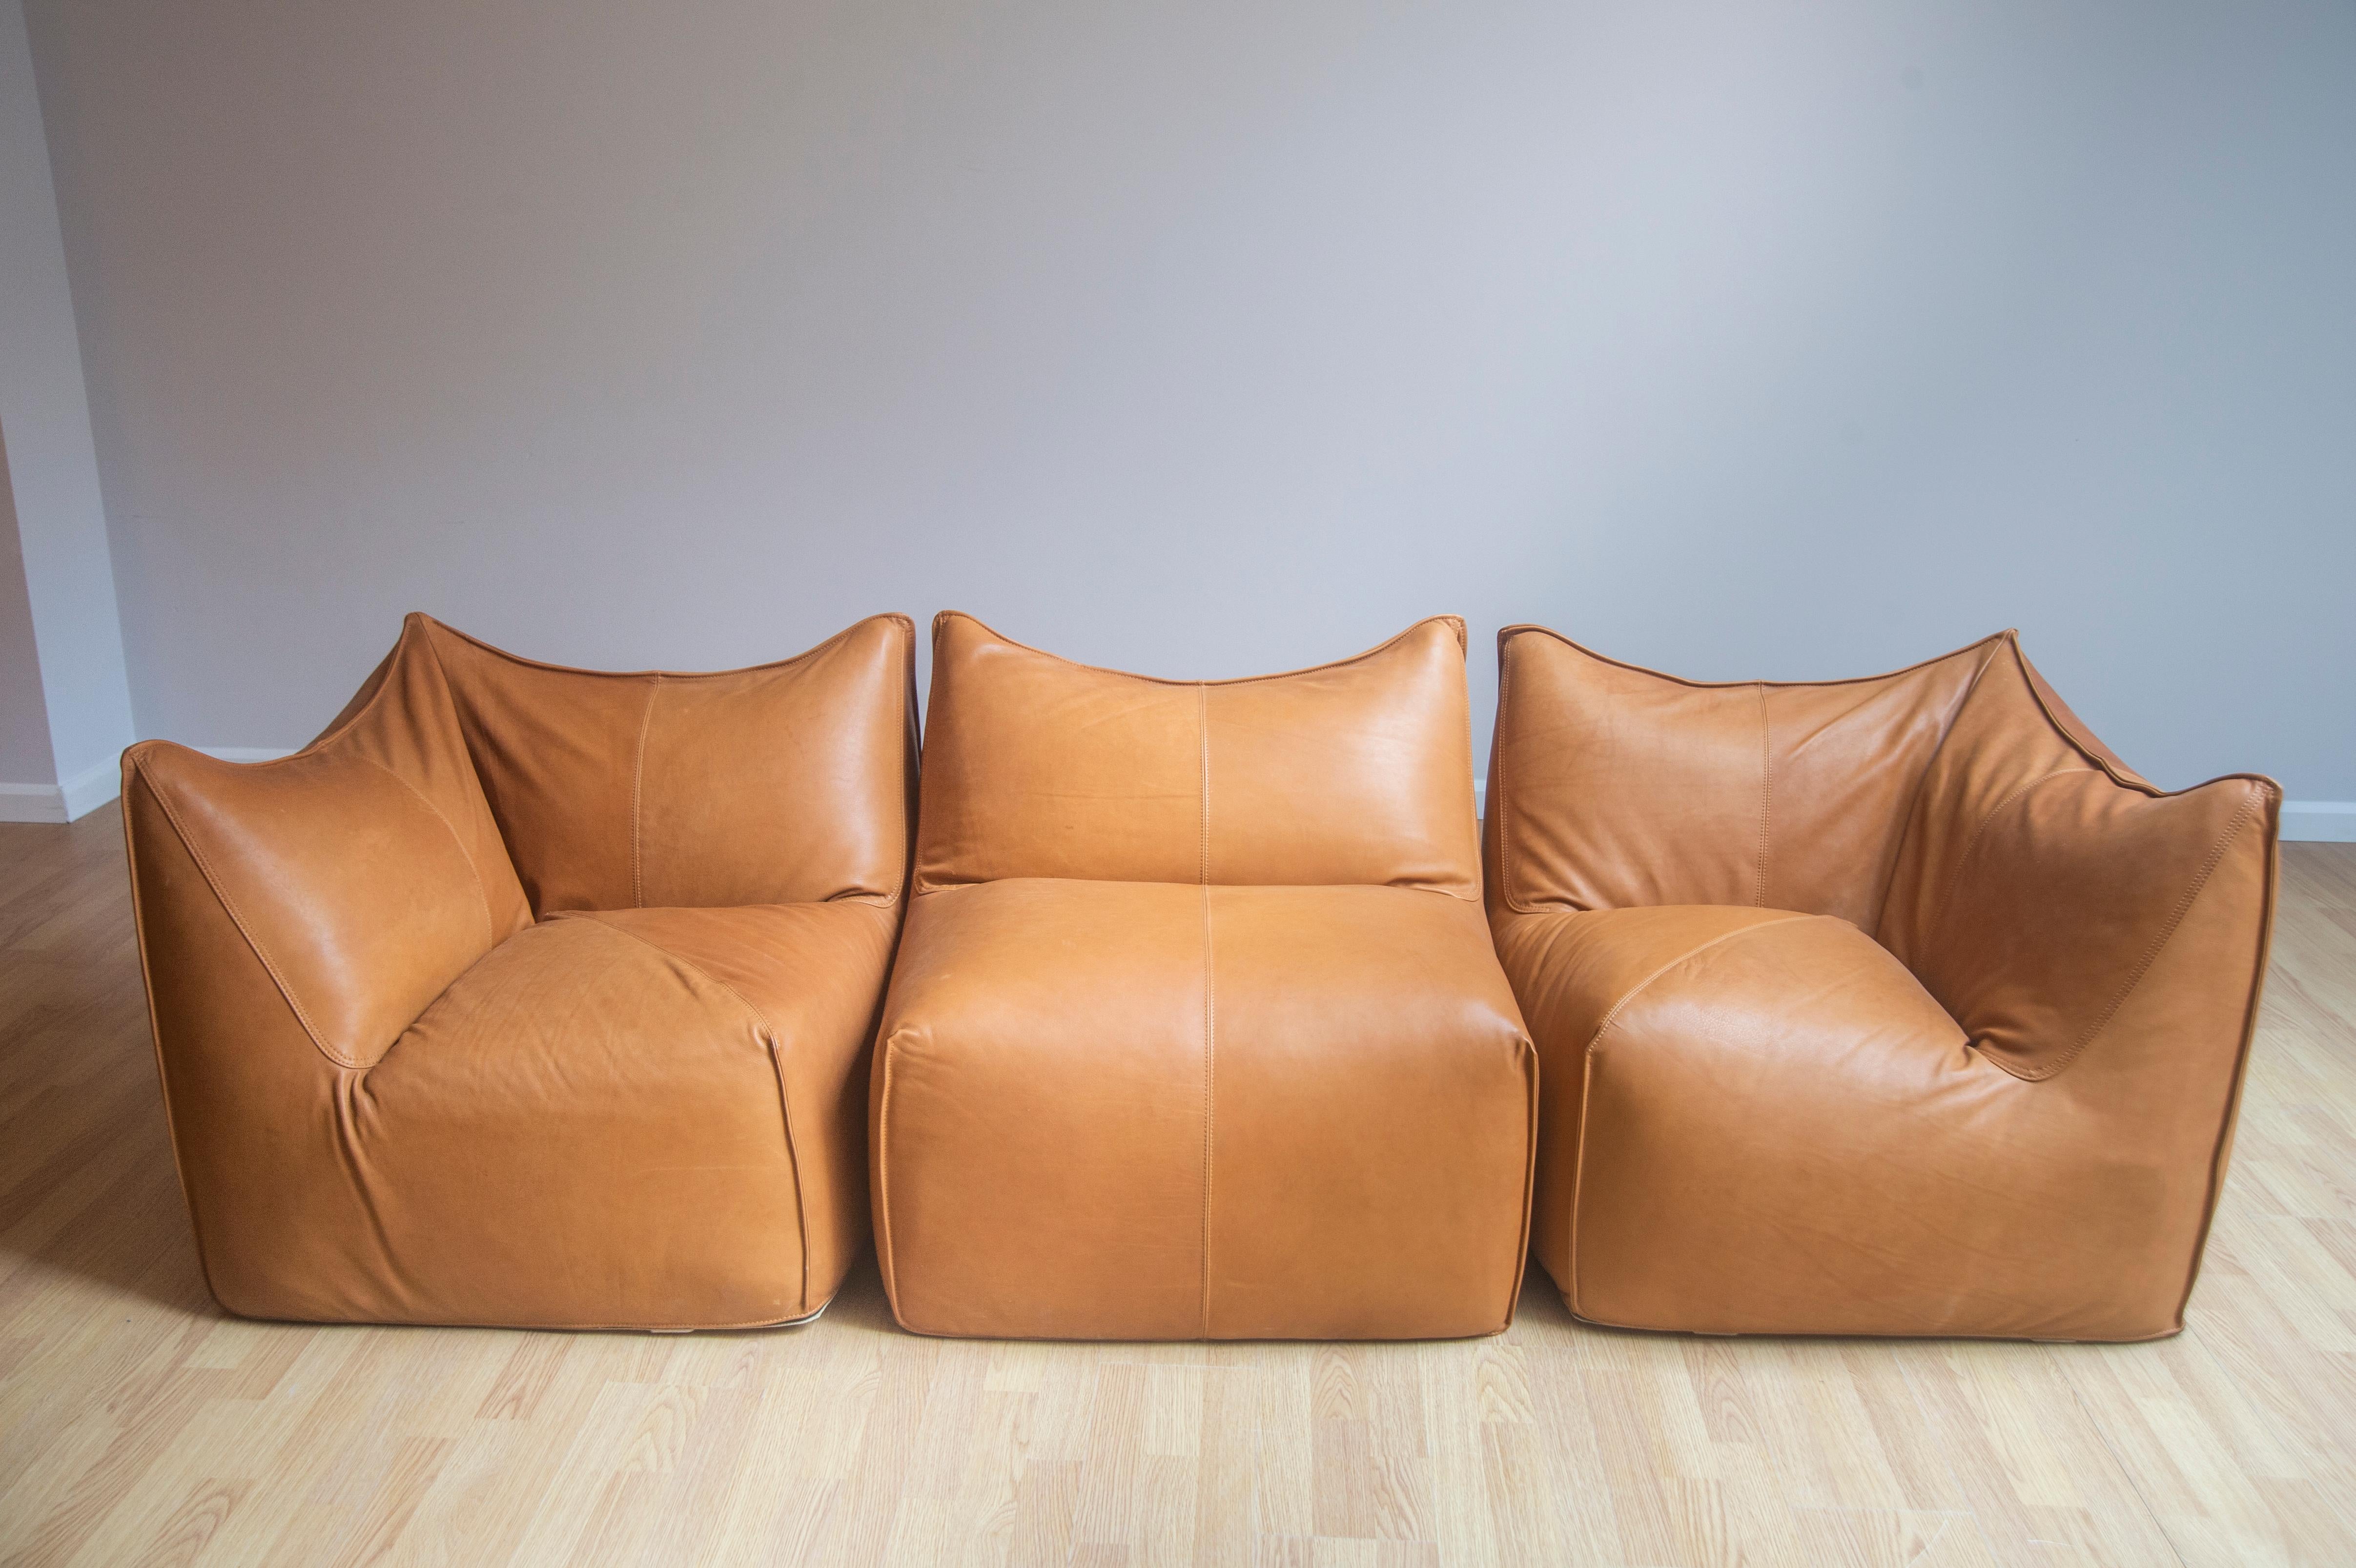 Bambole leather sofa by Bonjour Ostende.
Dimensions: D 102 x W 291 x H 70 cm, Seat H 38 cm.
Materials: Full gran aniline cognac leather.

2 x Corner seat
1 x Open seat

Bonjour Ostende is the place in Oostende, Belgium for lovers of vintage,